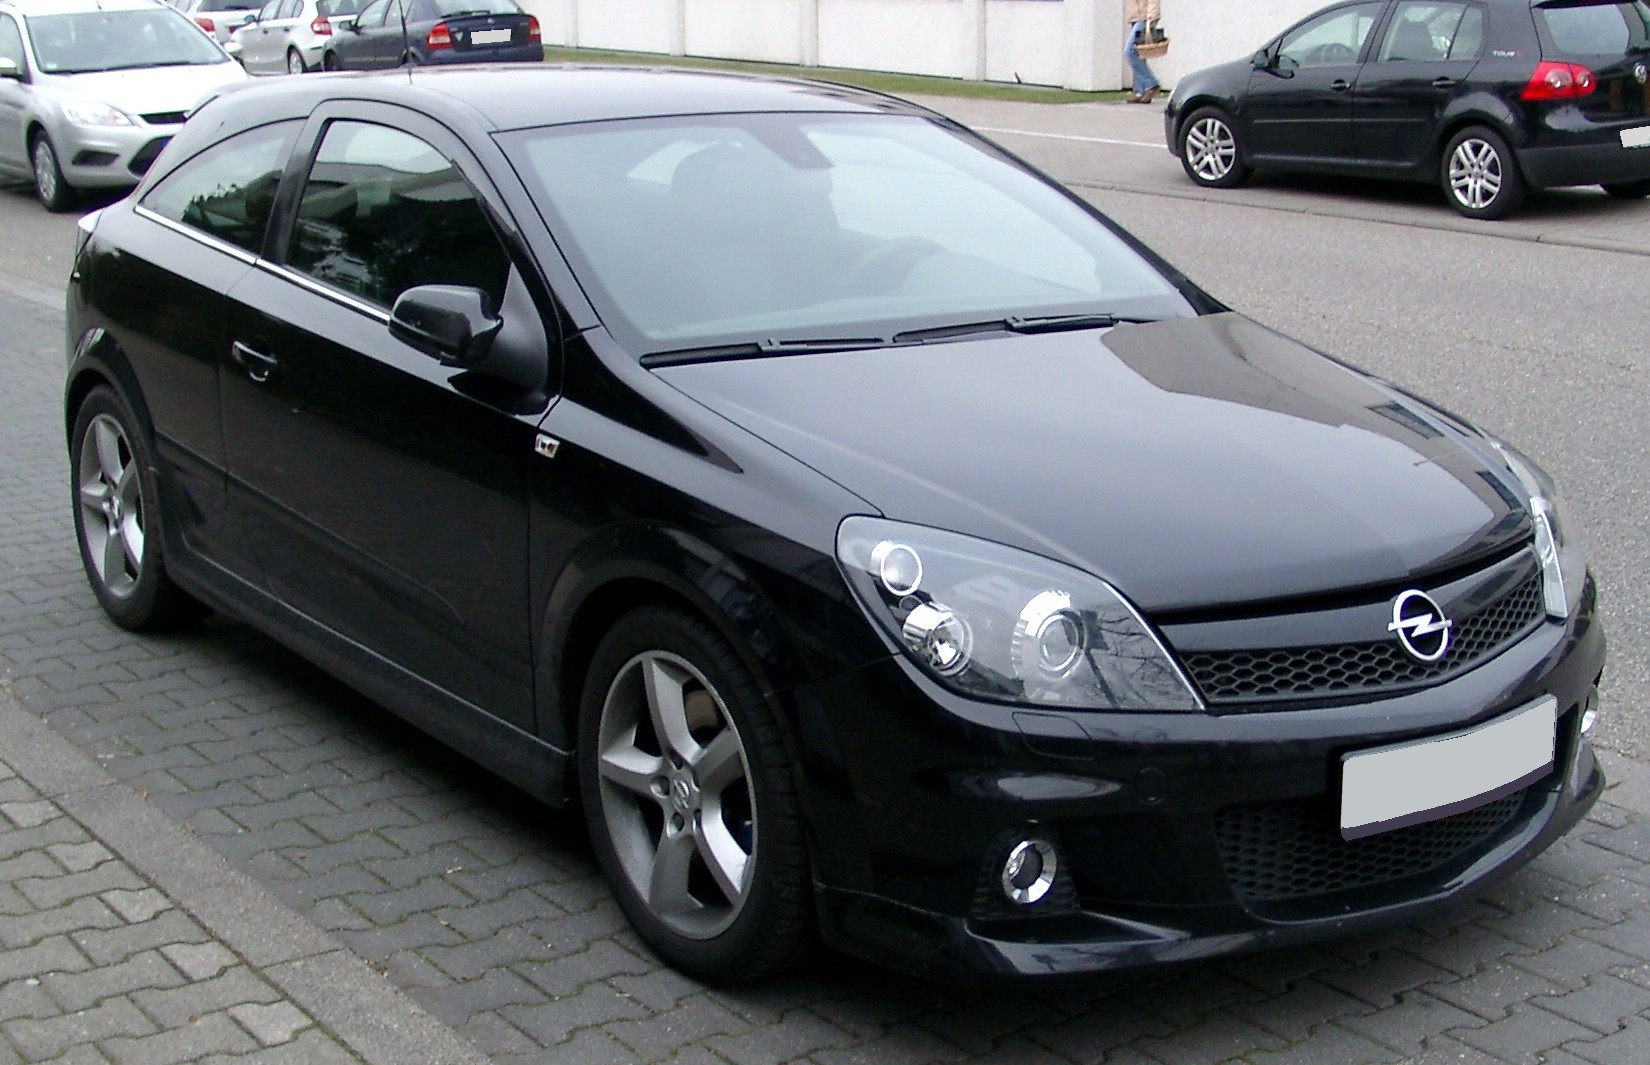 File:Opel Astra OPC front 20080306.jpg - Wikimedia Commons